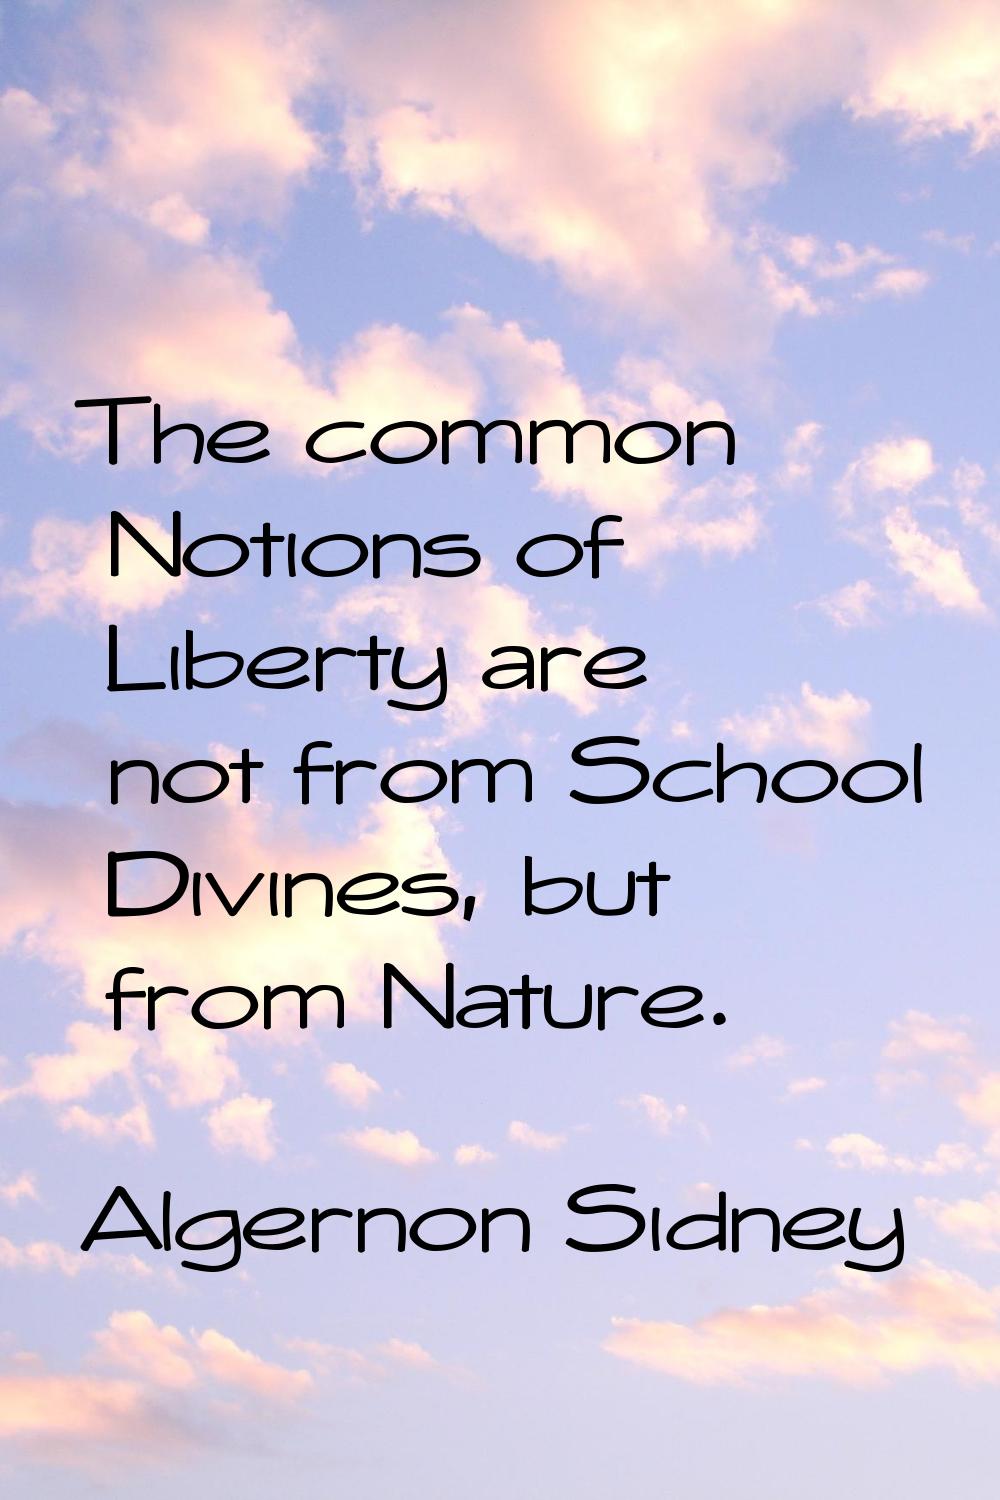 The common Notions of Liberty are not from School Divines, but from Nature.